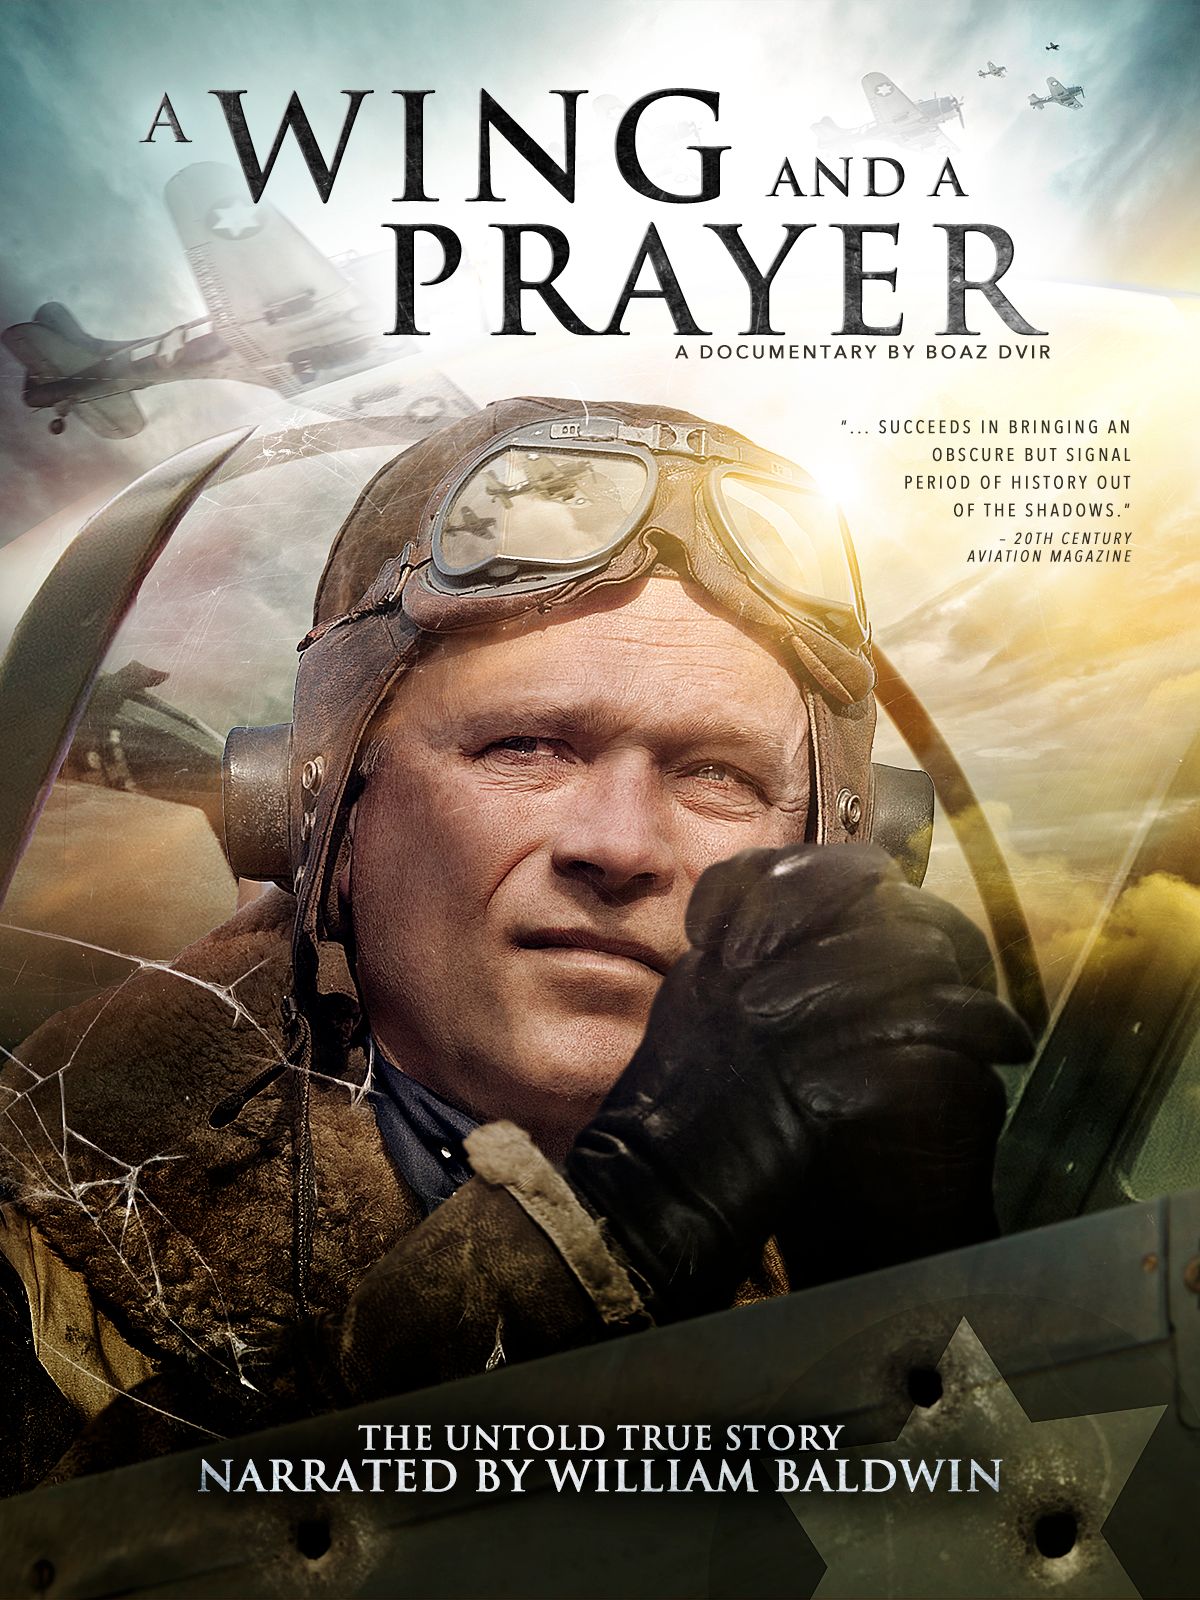 Keyart for the movie A Wing and a Prayer